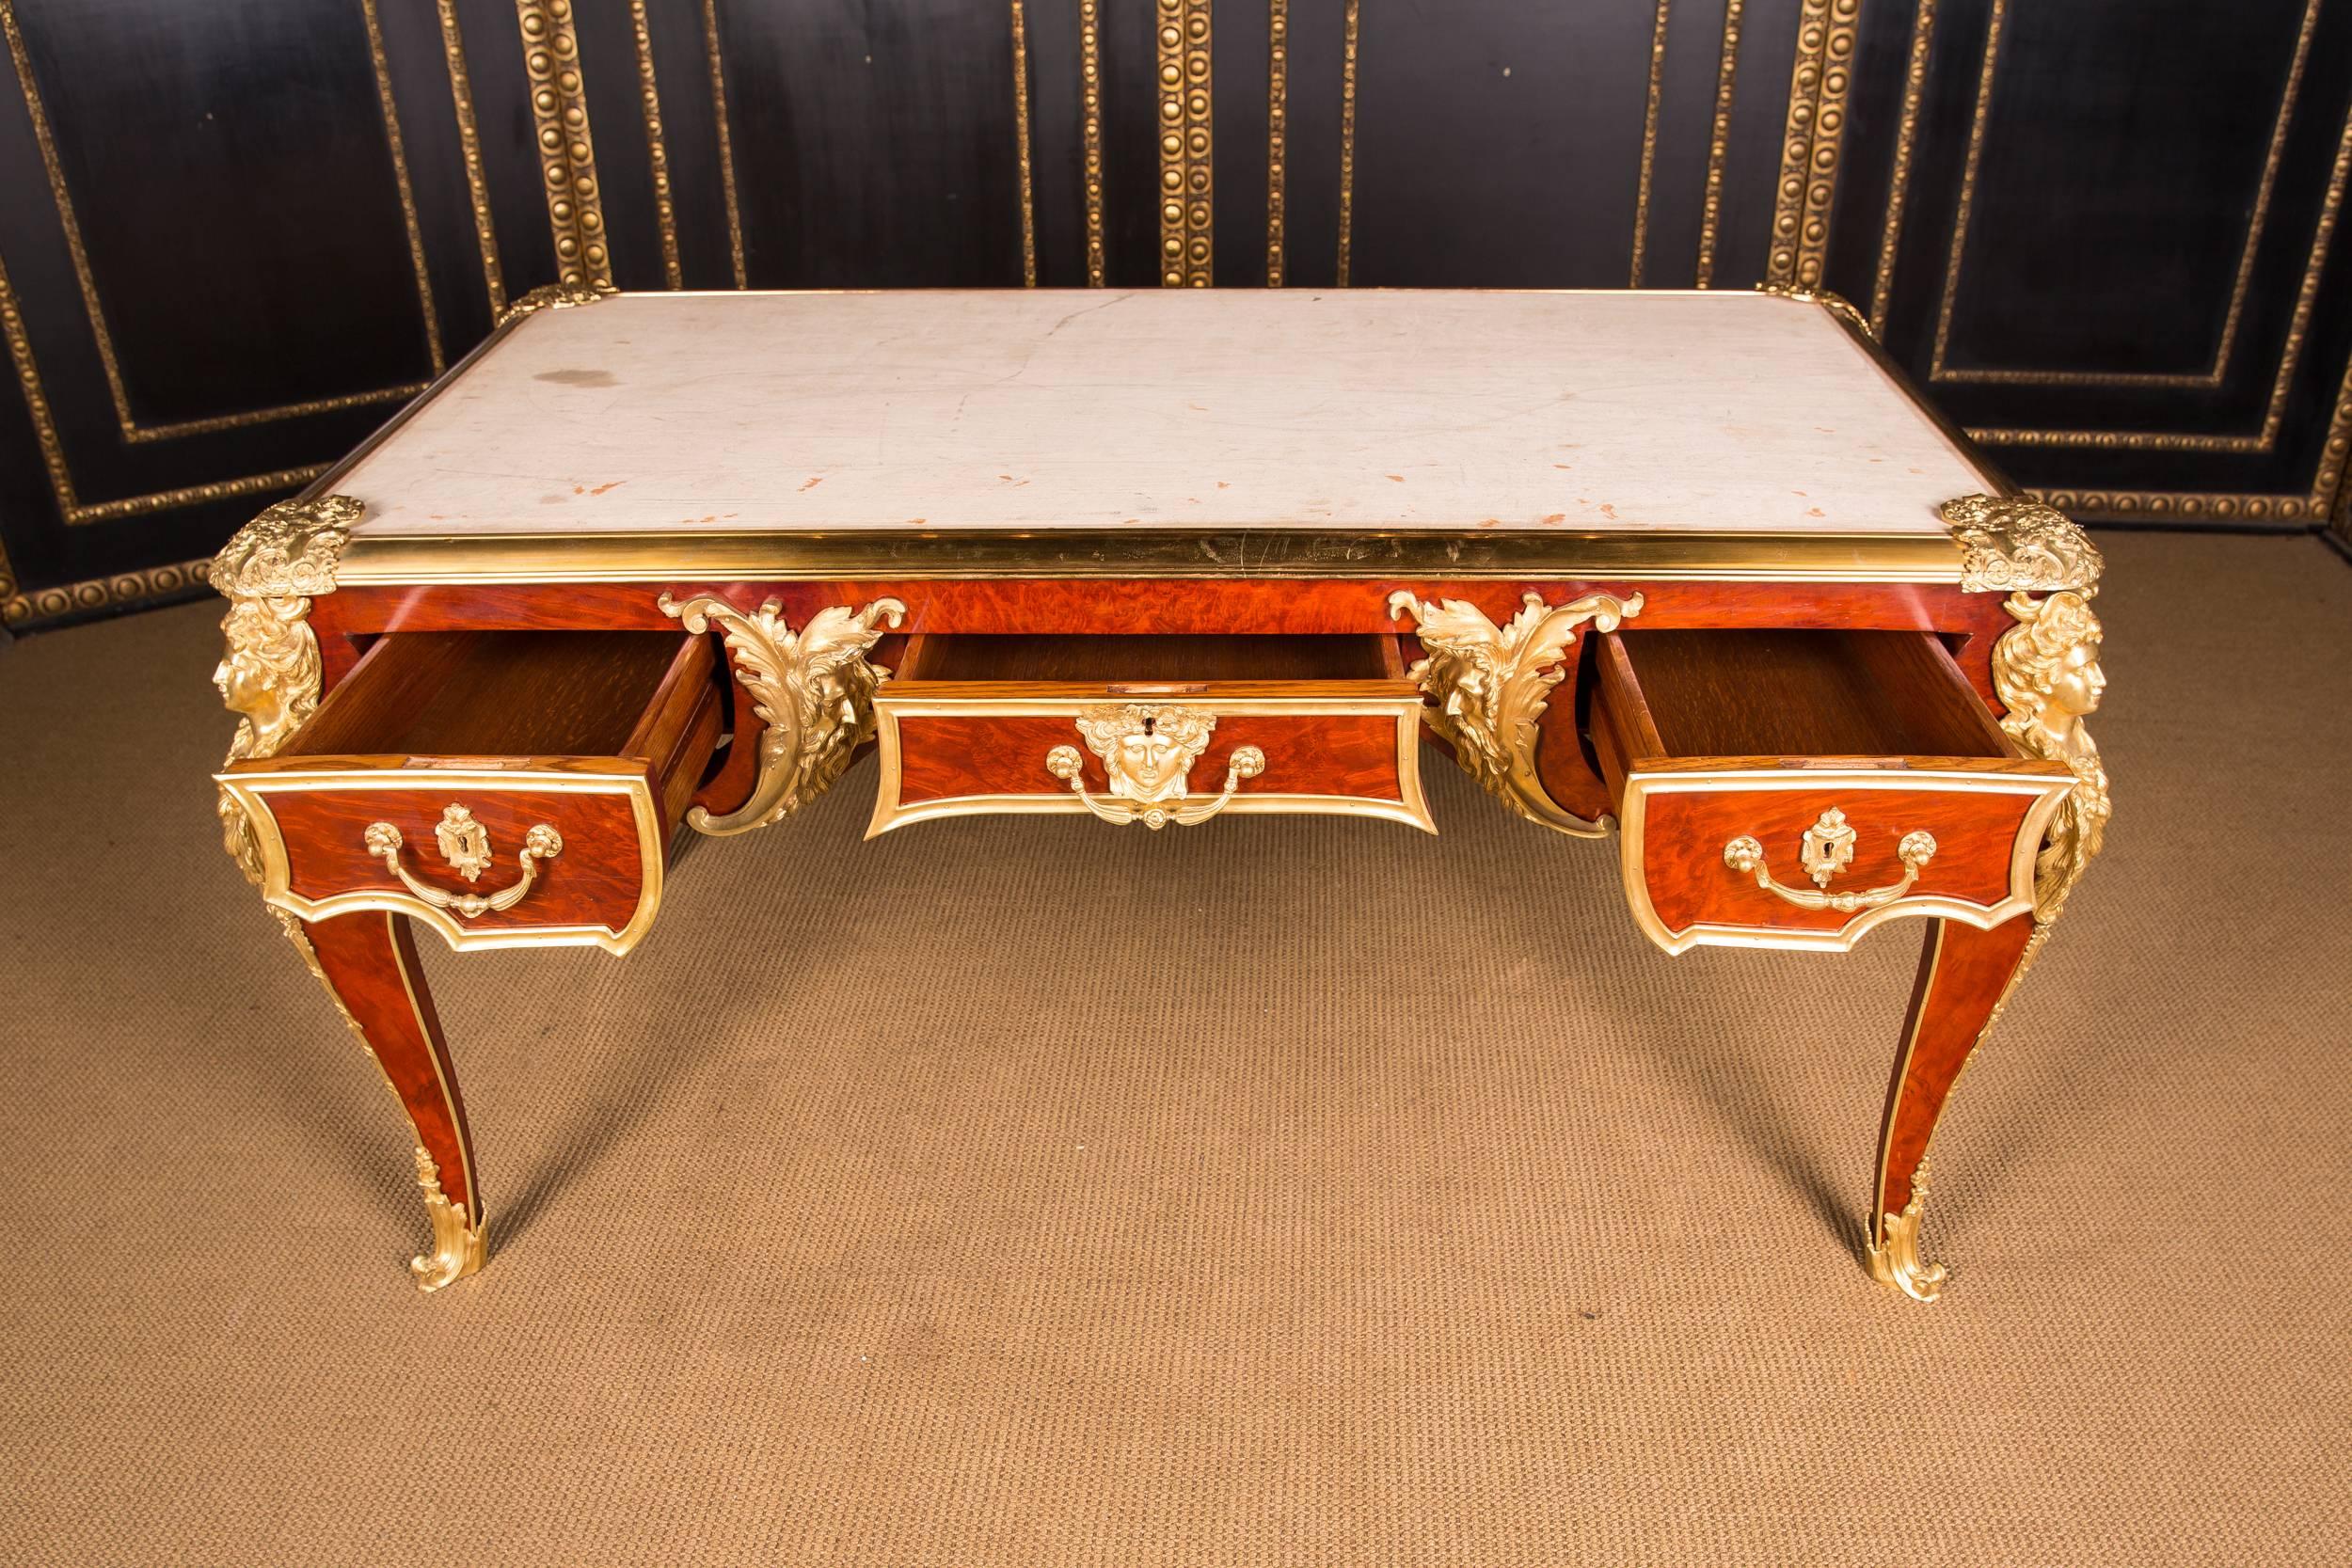 Rosewood Majestic French Bureau Plat Desk According to Andre C. Boulle